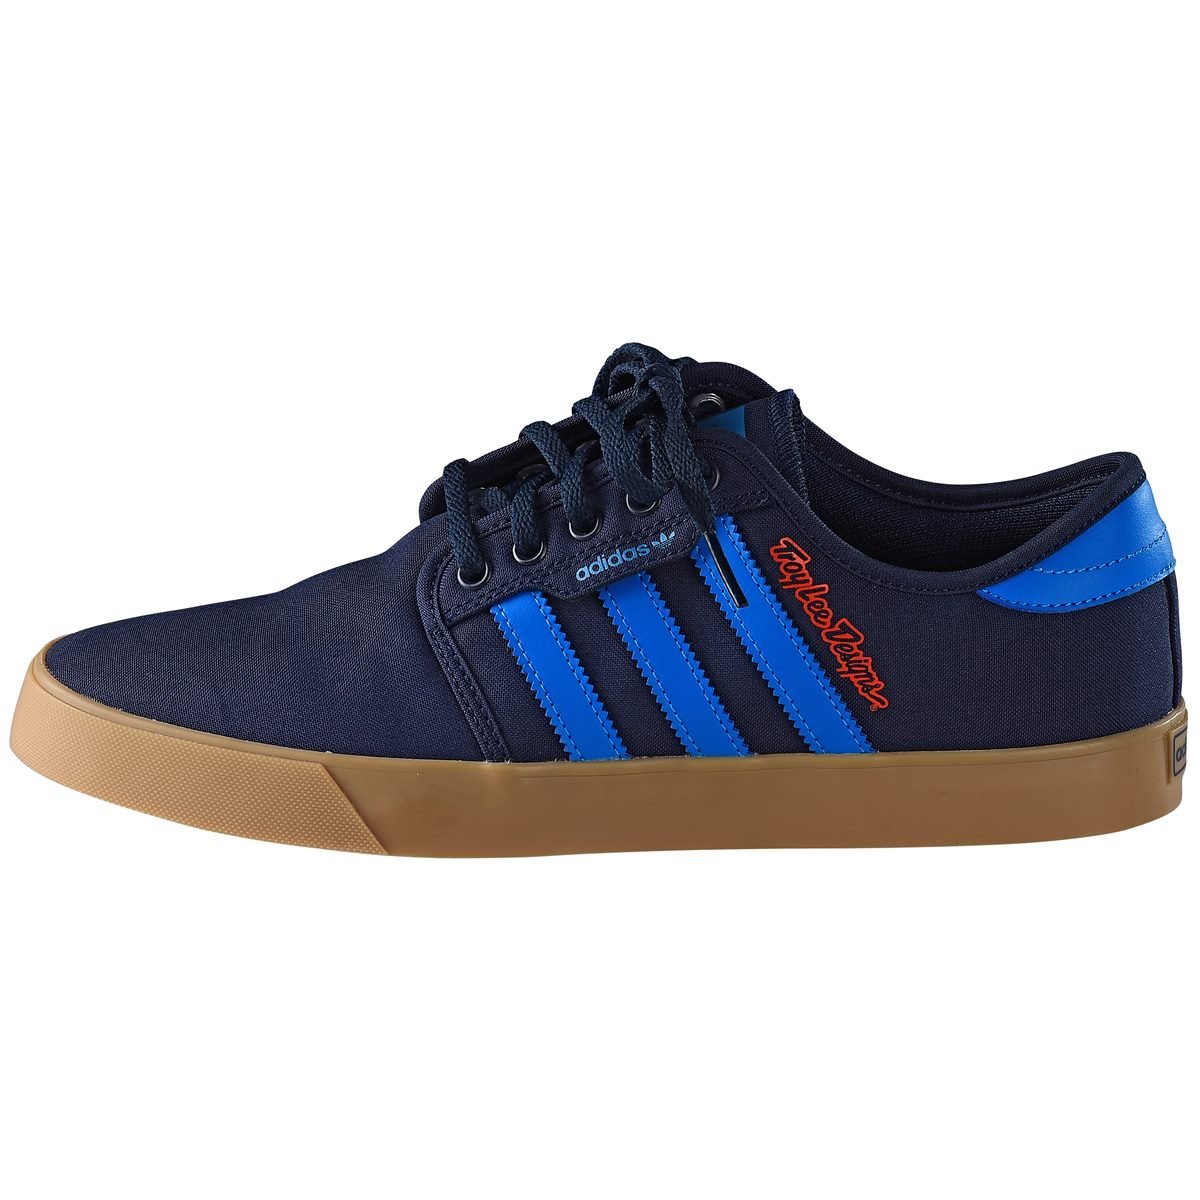 troy lee adidas shoes online -